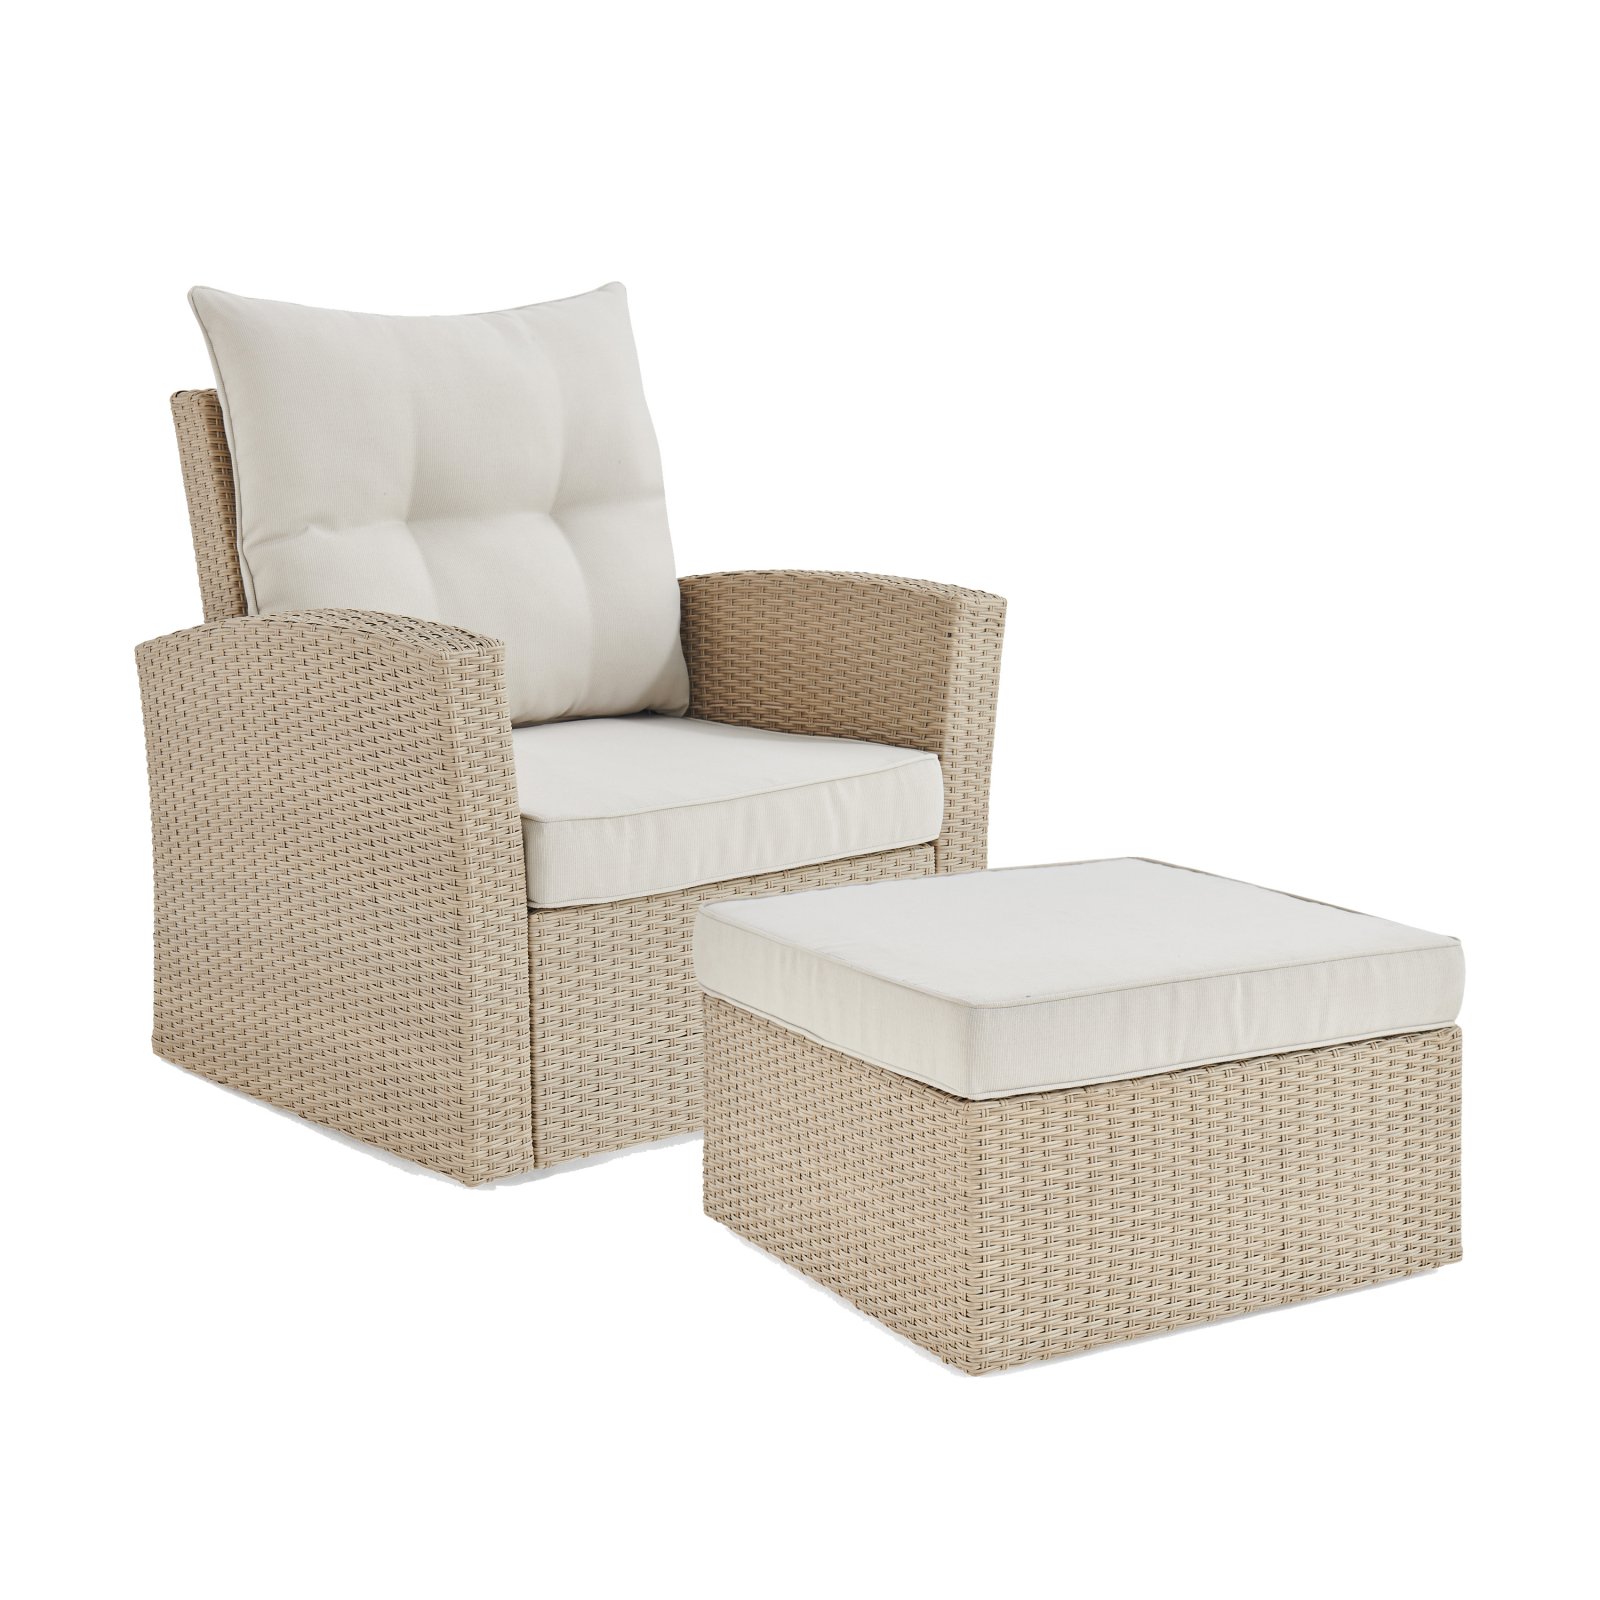 Canaan Cream Wicker Outdoor Seating Set w/ 2 Chairs and 2 Large Ottomans - image 2 of 10